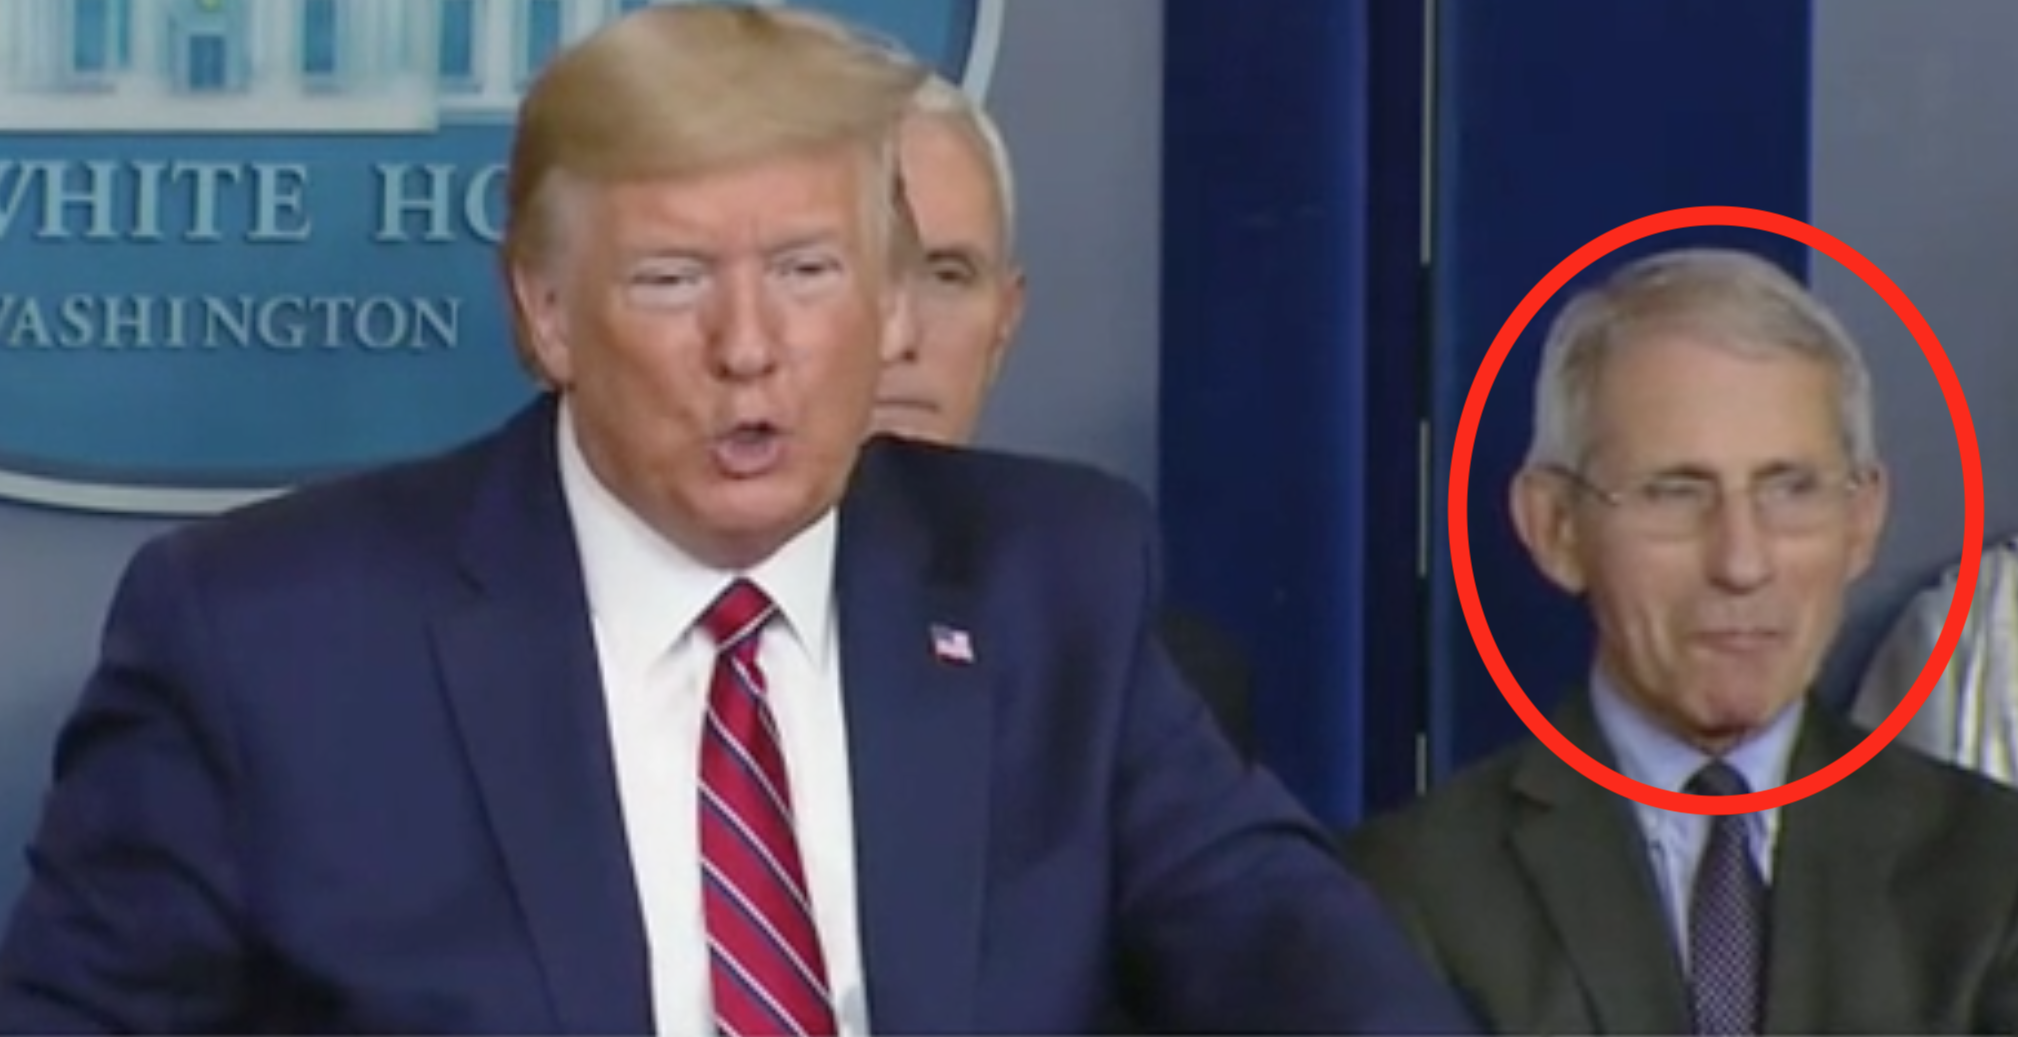 Dr. Anthony Fauci tries not to laugh during Trump press conference. Screenshot/Fox News